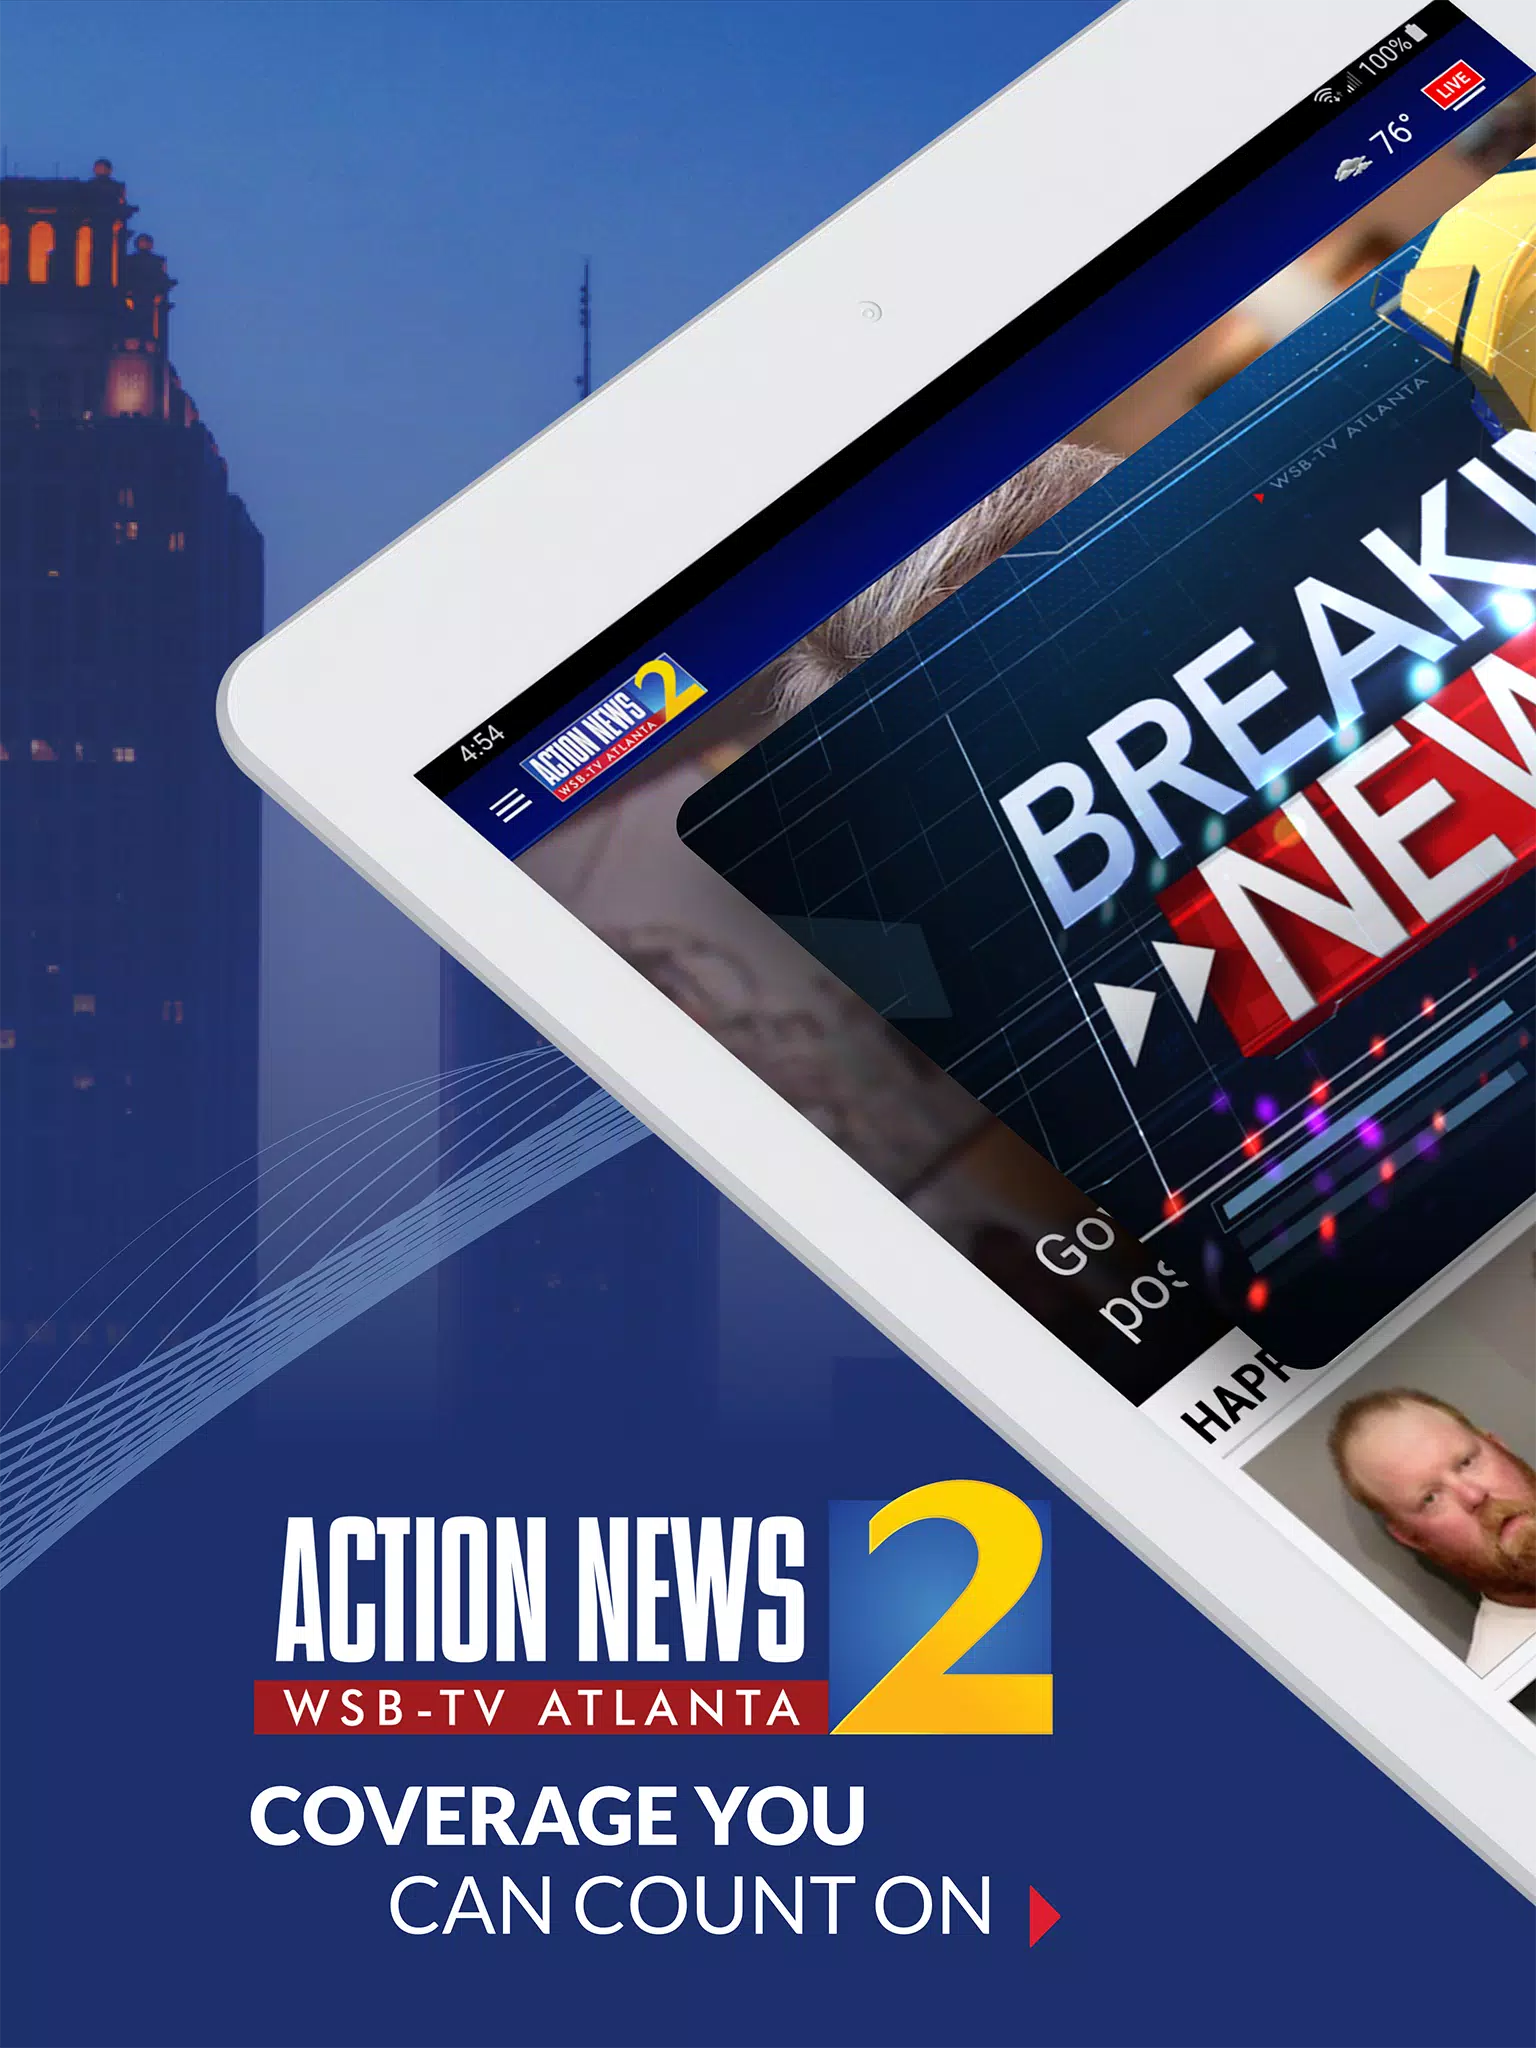 WCAX Channel 3 News APK for Android Download